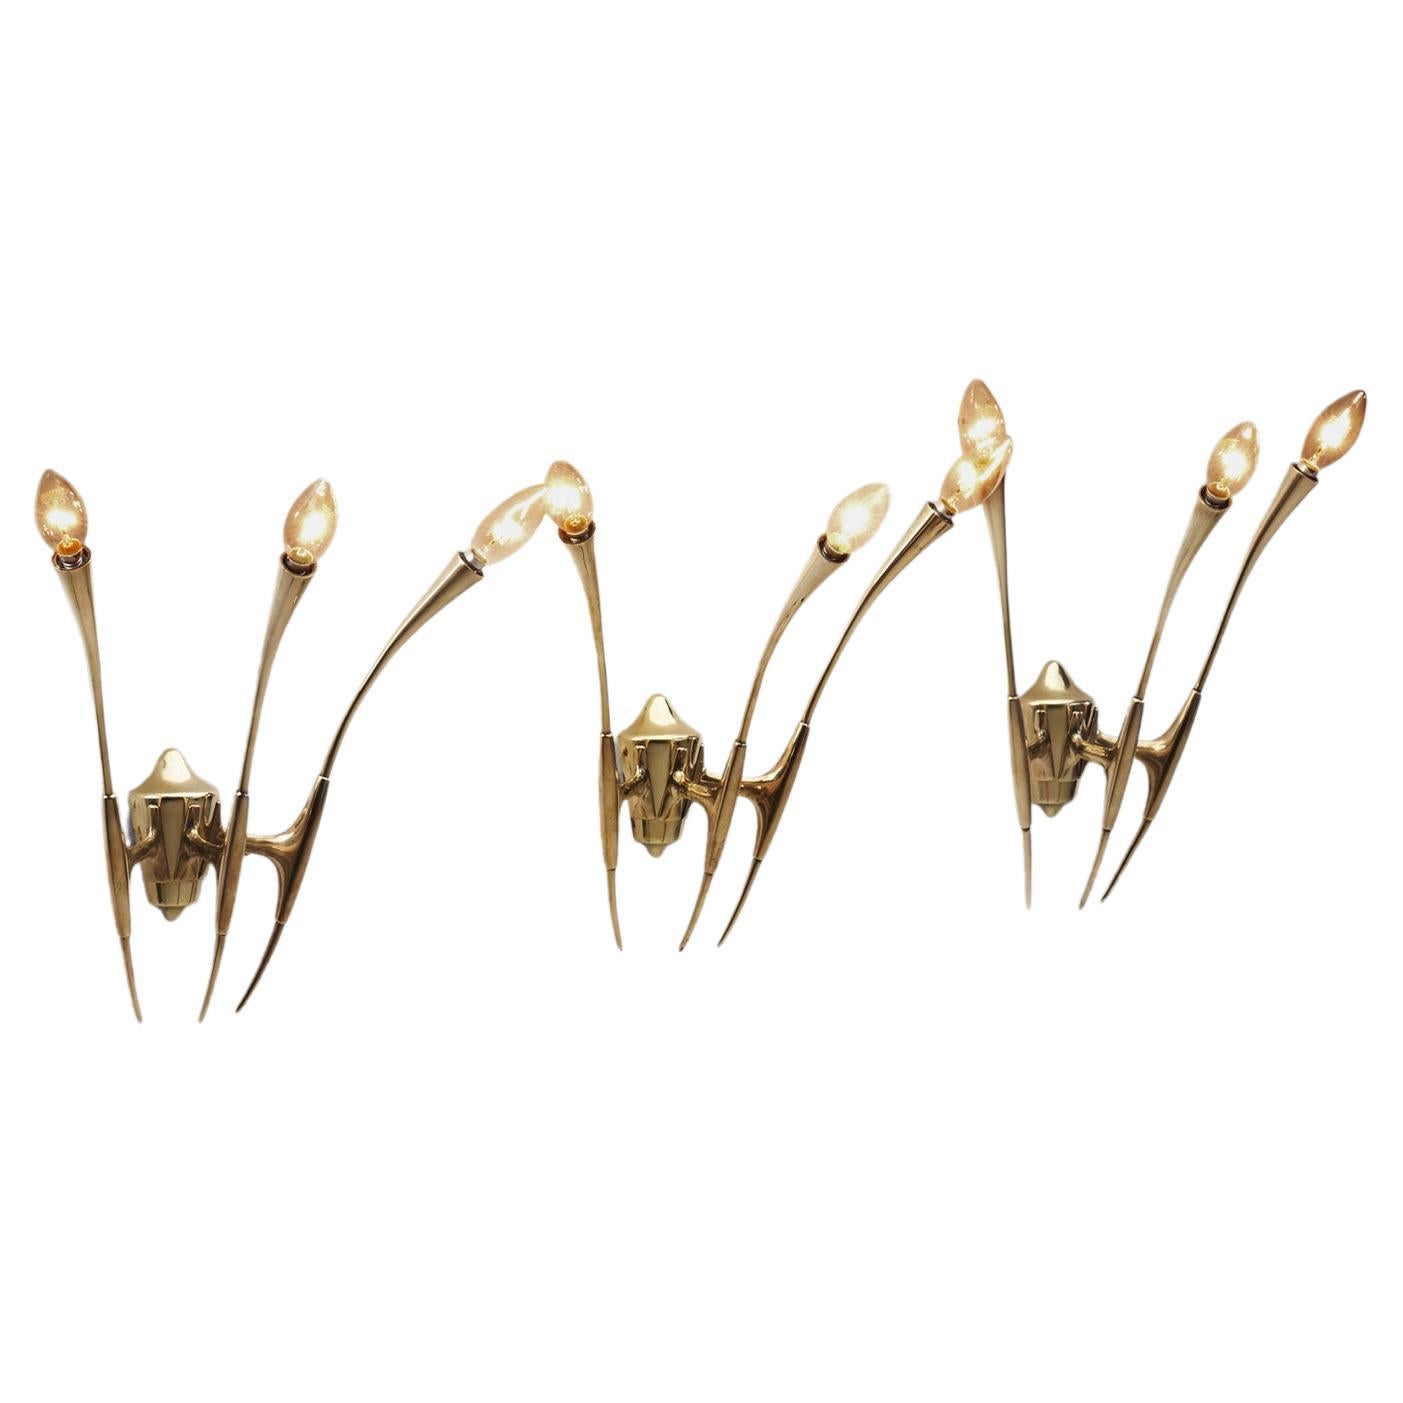 Oscar Torlasco Sculptural Brass Wall Lights for Lumi, Italy, 1950s For Sale